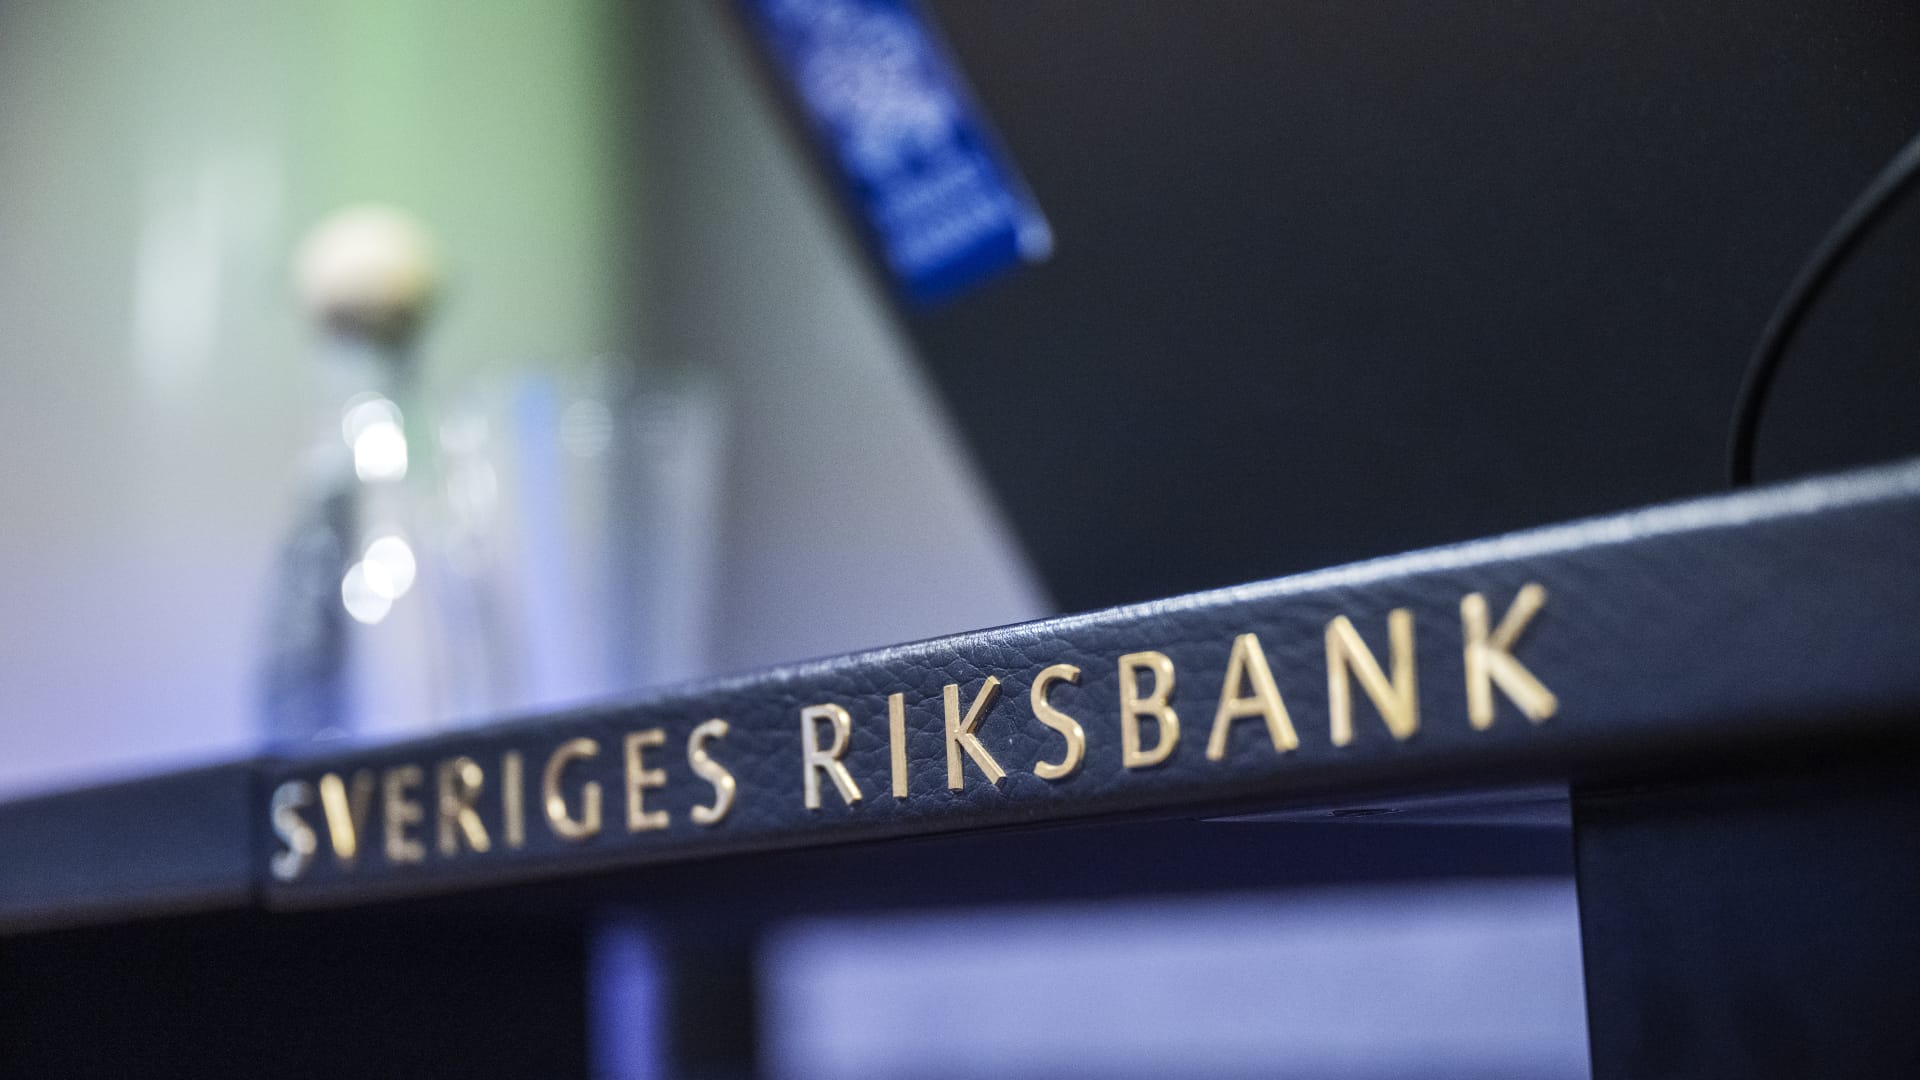 Sweden’s central bank launches an interest rate increase of 100 basis points